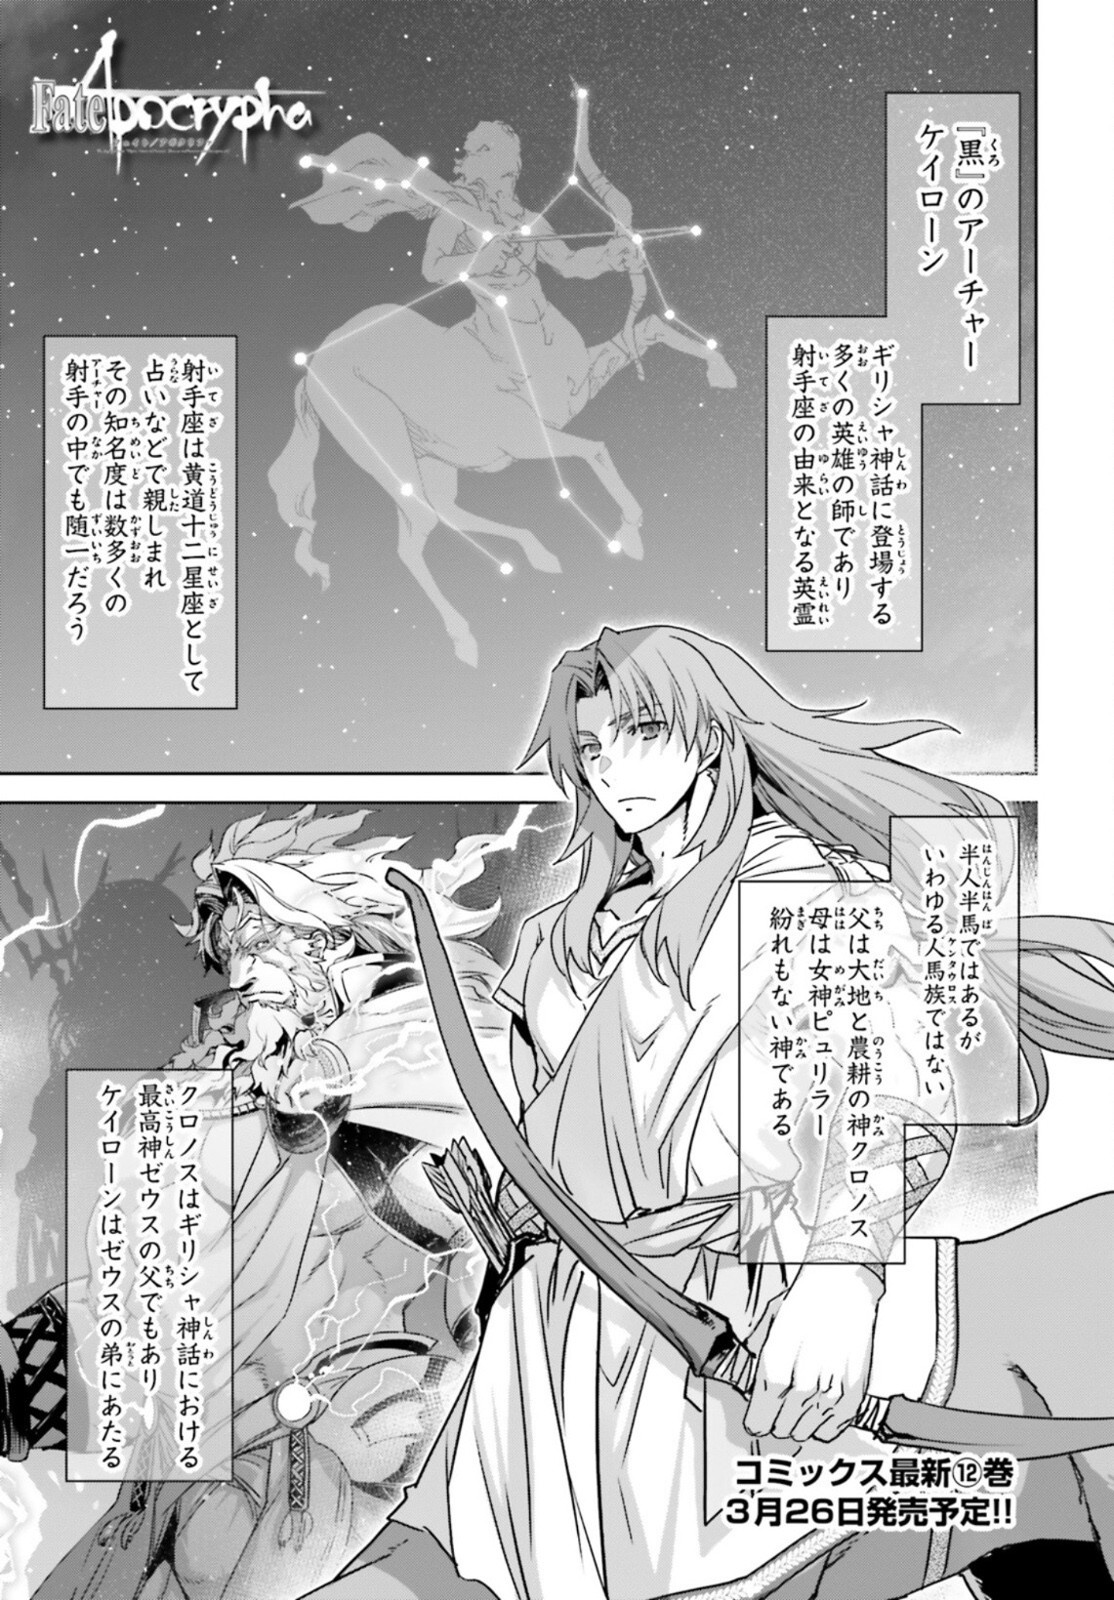 Fate-Apocrypha - Chapter 57 - Page 1